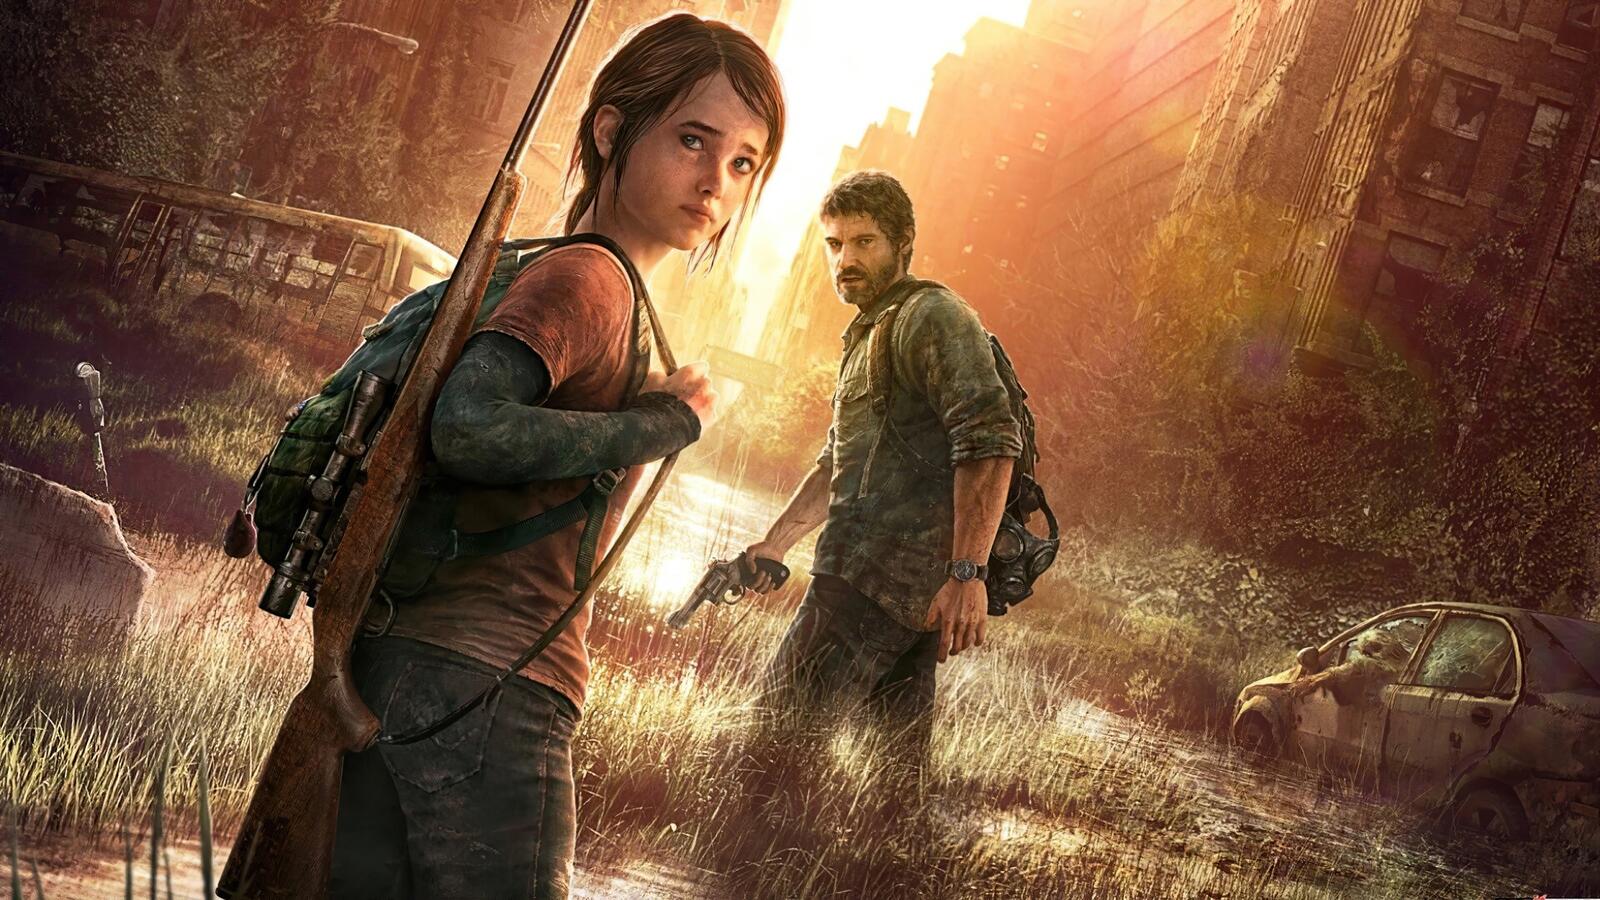 Wallpapers the last of us extras Ellie And Joel on the desktop